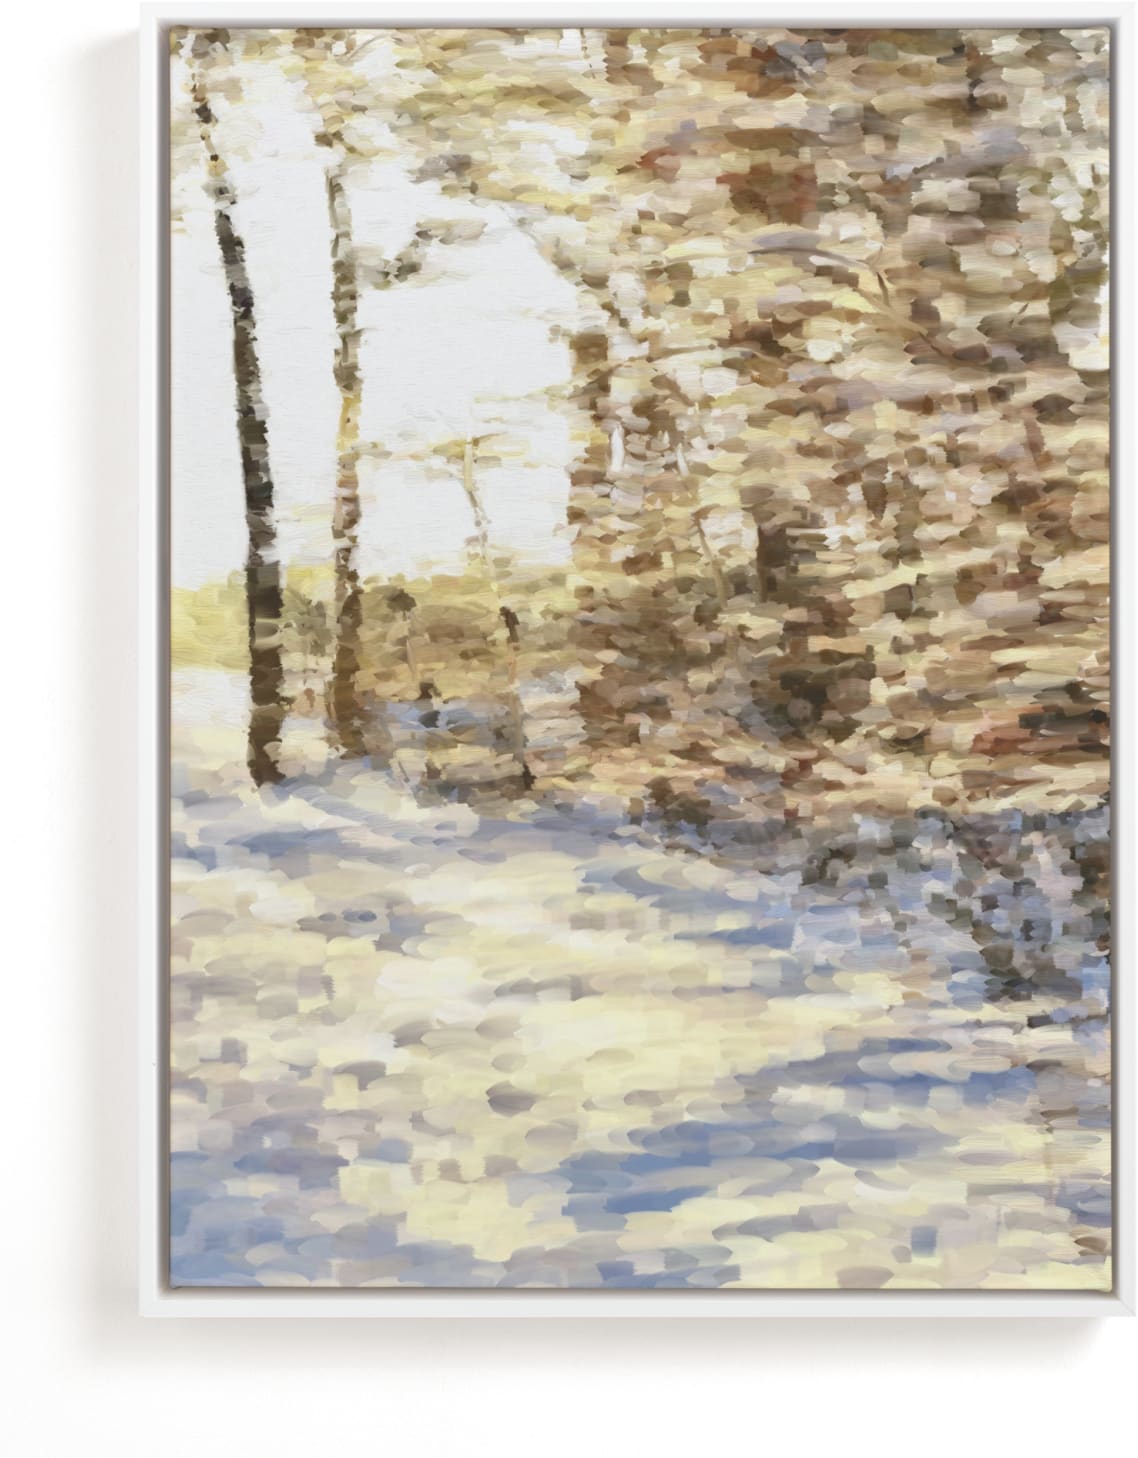 This is a white art by Amy Hall called Winter Walk.